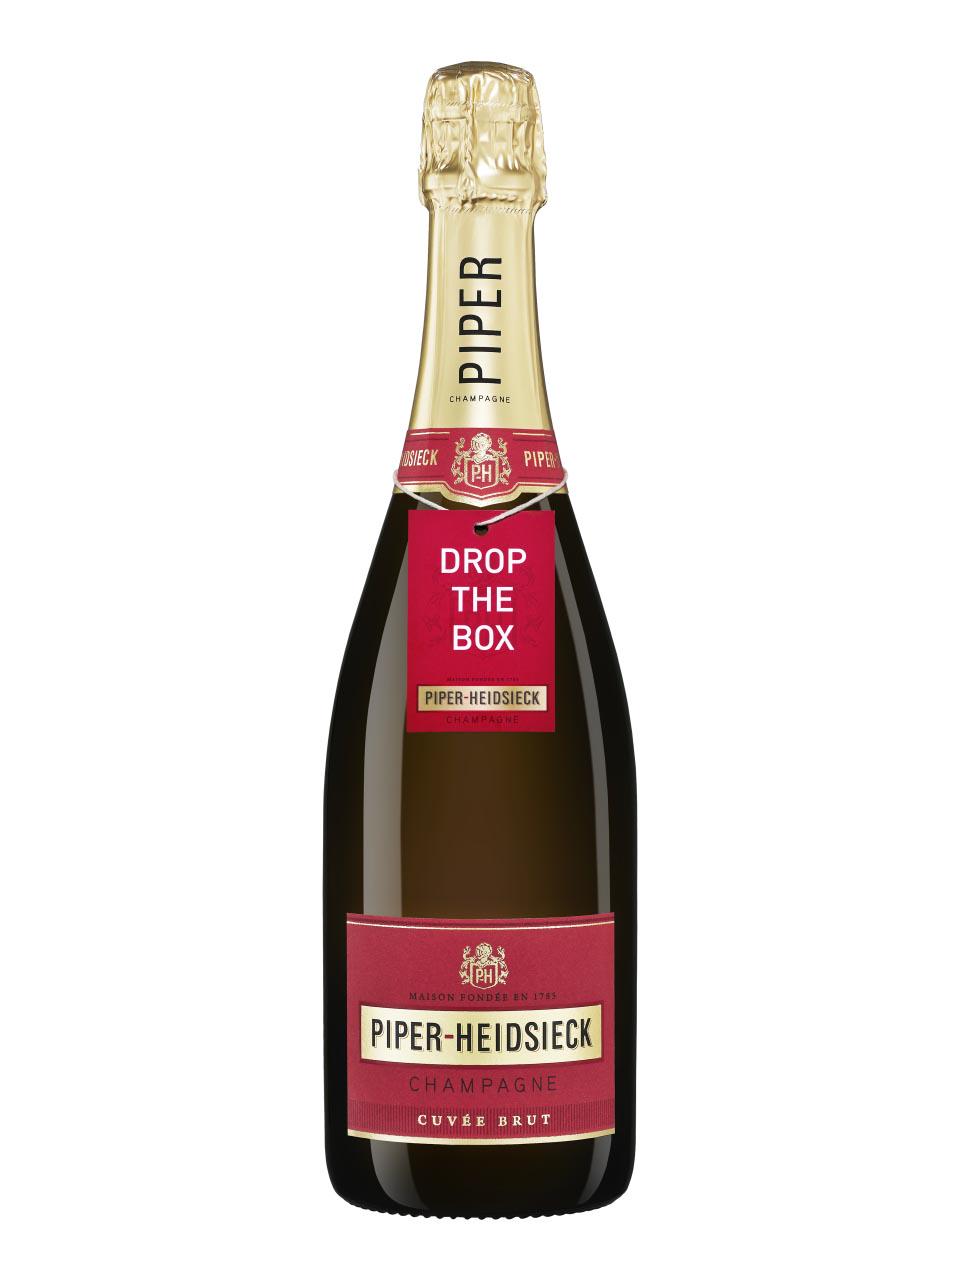 Brut, Frankfurt | Year brut, New Online weiß box) Cuvée (Chinese Edition gift Limited Champagne, Airport AOC, Shopping Piper-Heidsieck, 0.75L